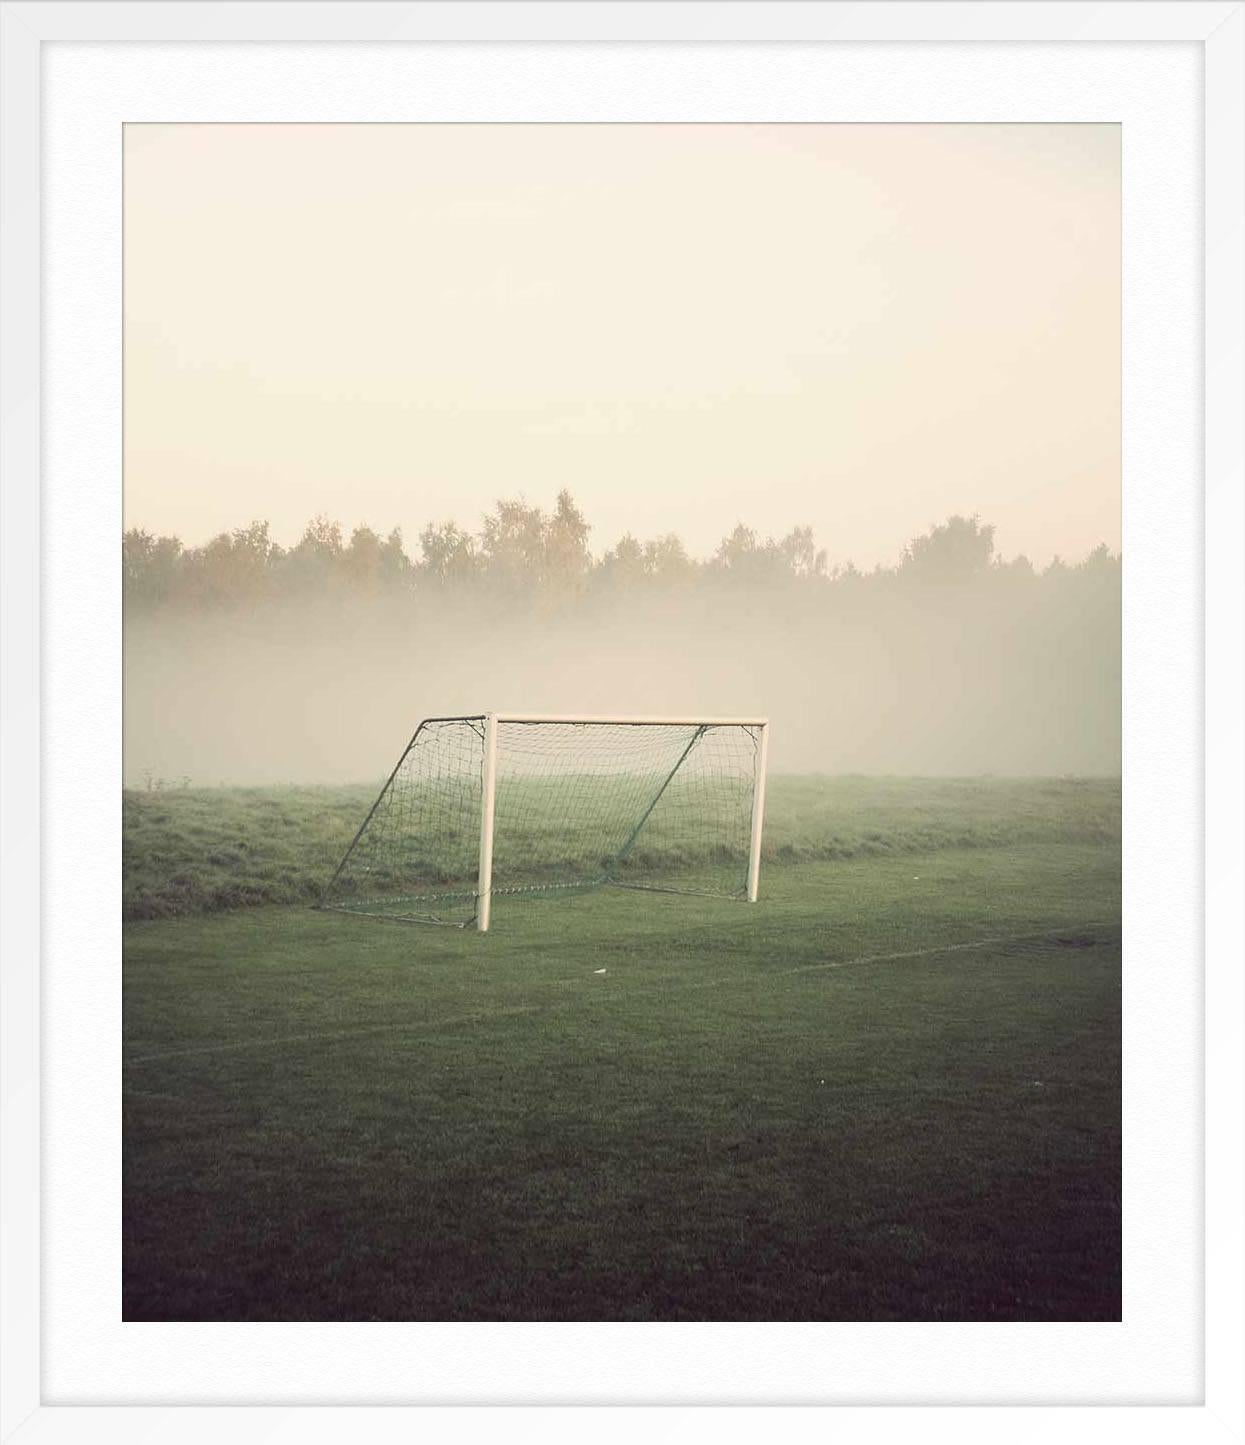 ABOUT THIS PIECE: Photographer Kim Høltermand took this photo in the early morning at a Danish Soccer Pitch. He is known for his moody, quiet photos that show public spaces before the crowds. They offer a sense of calm.

ABOUT THIS ARTIST: Kim